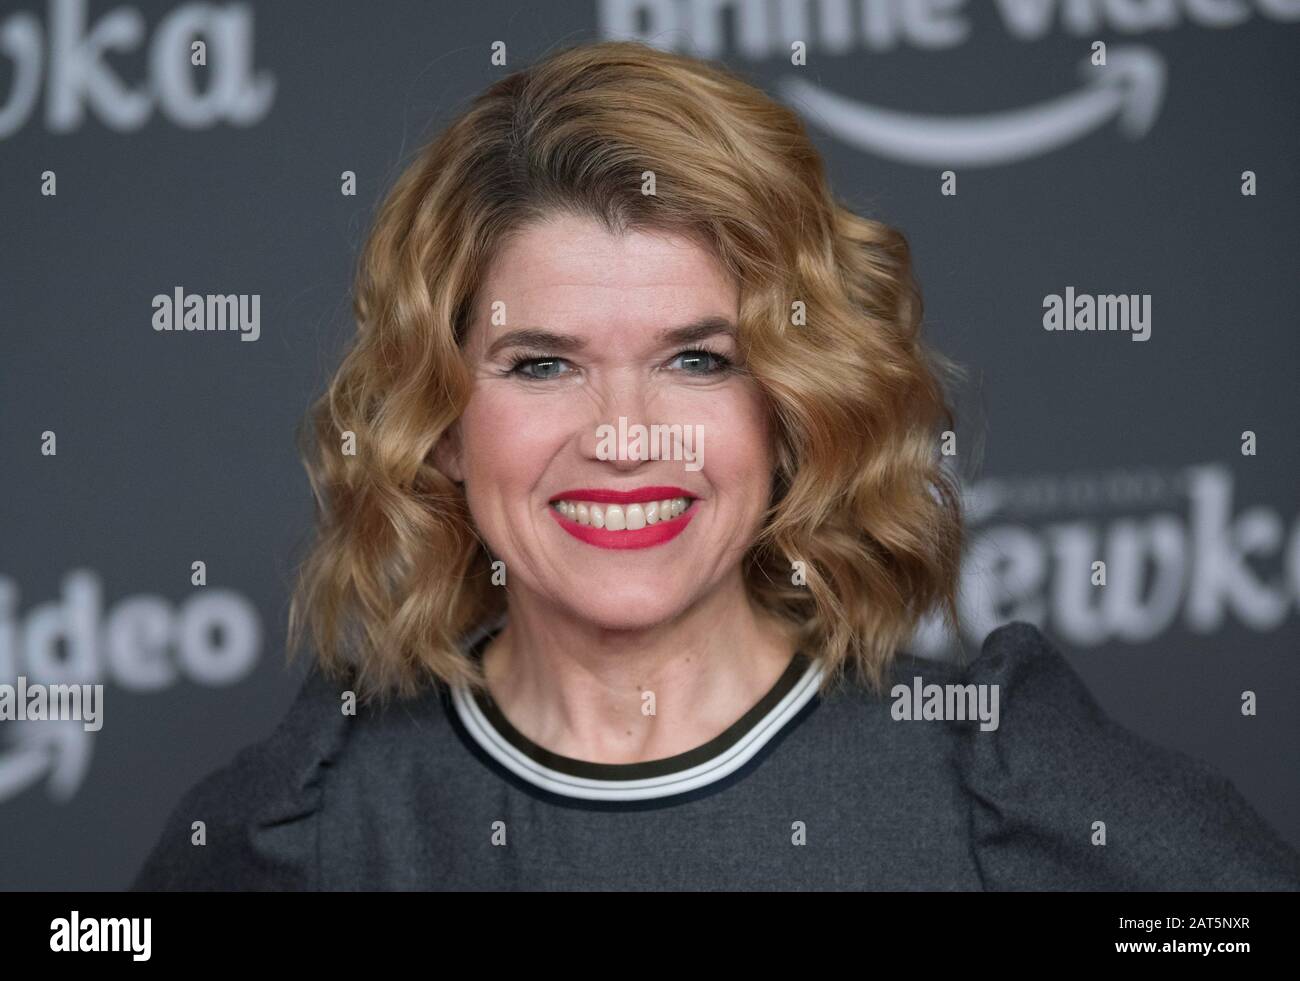 Page 3 - Anke Engelke High Resolution Stock Photography and Images - Alamy